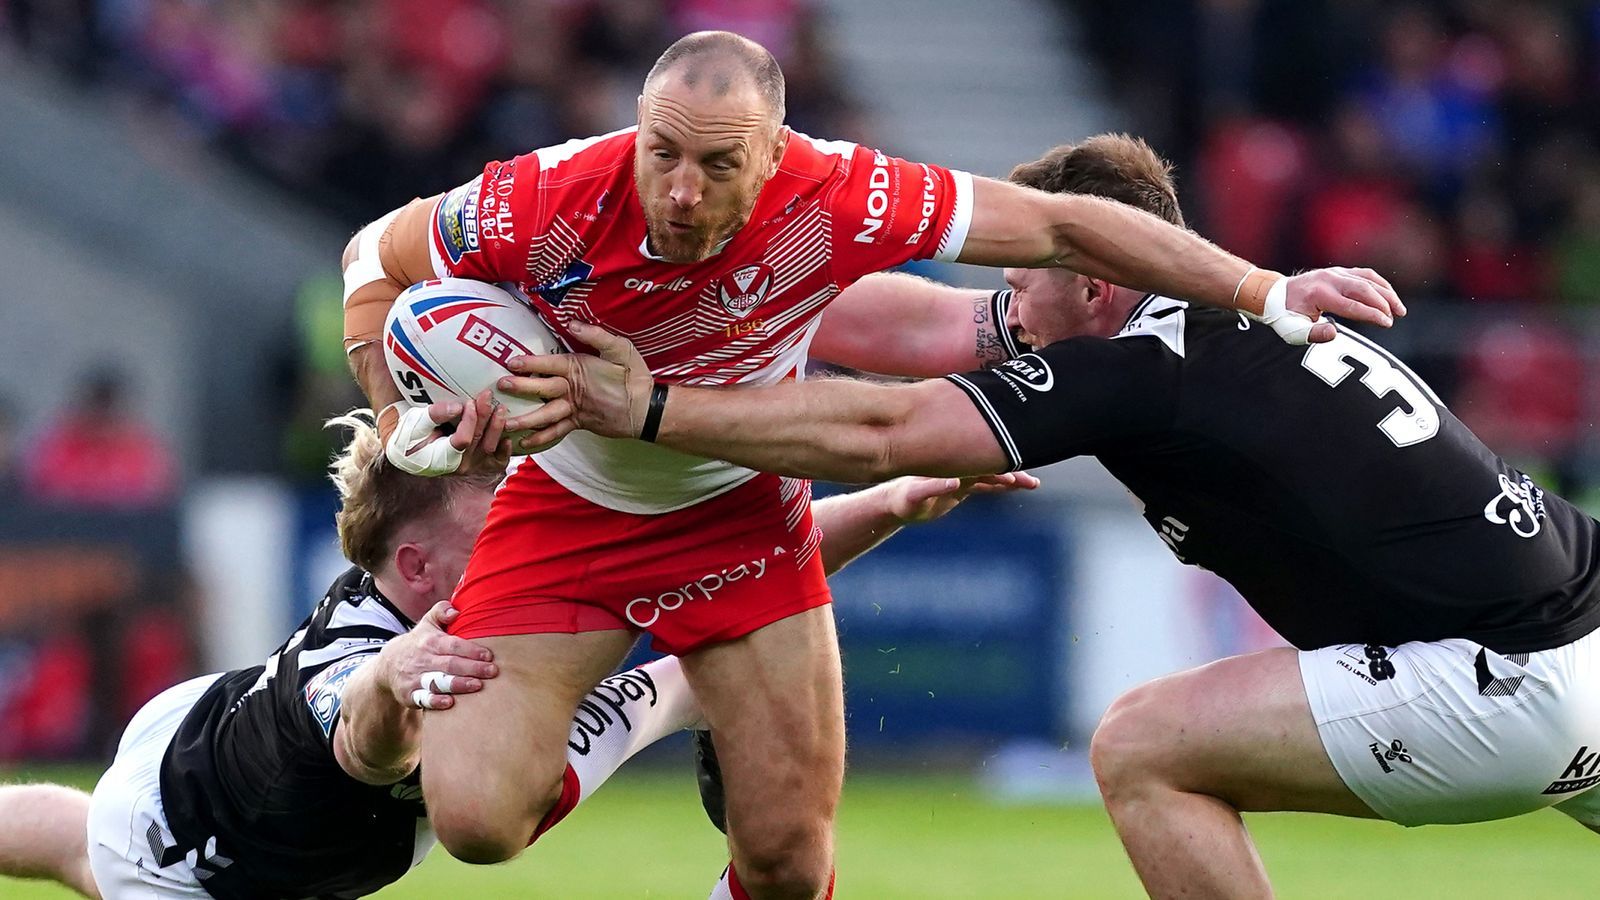 St Helens vs Hull FC Prediction, Betting Tips and Odds | 17 MARCH 2023